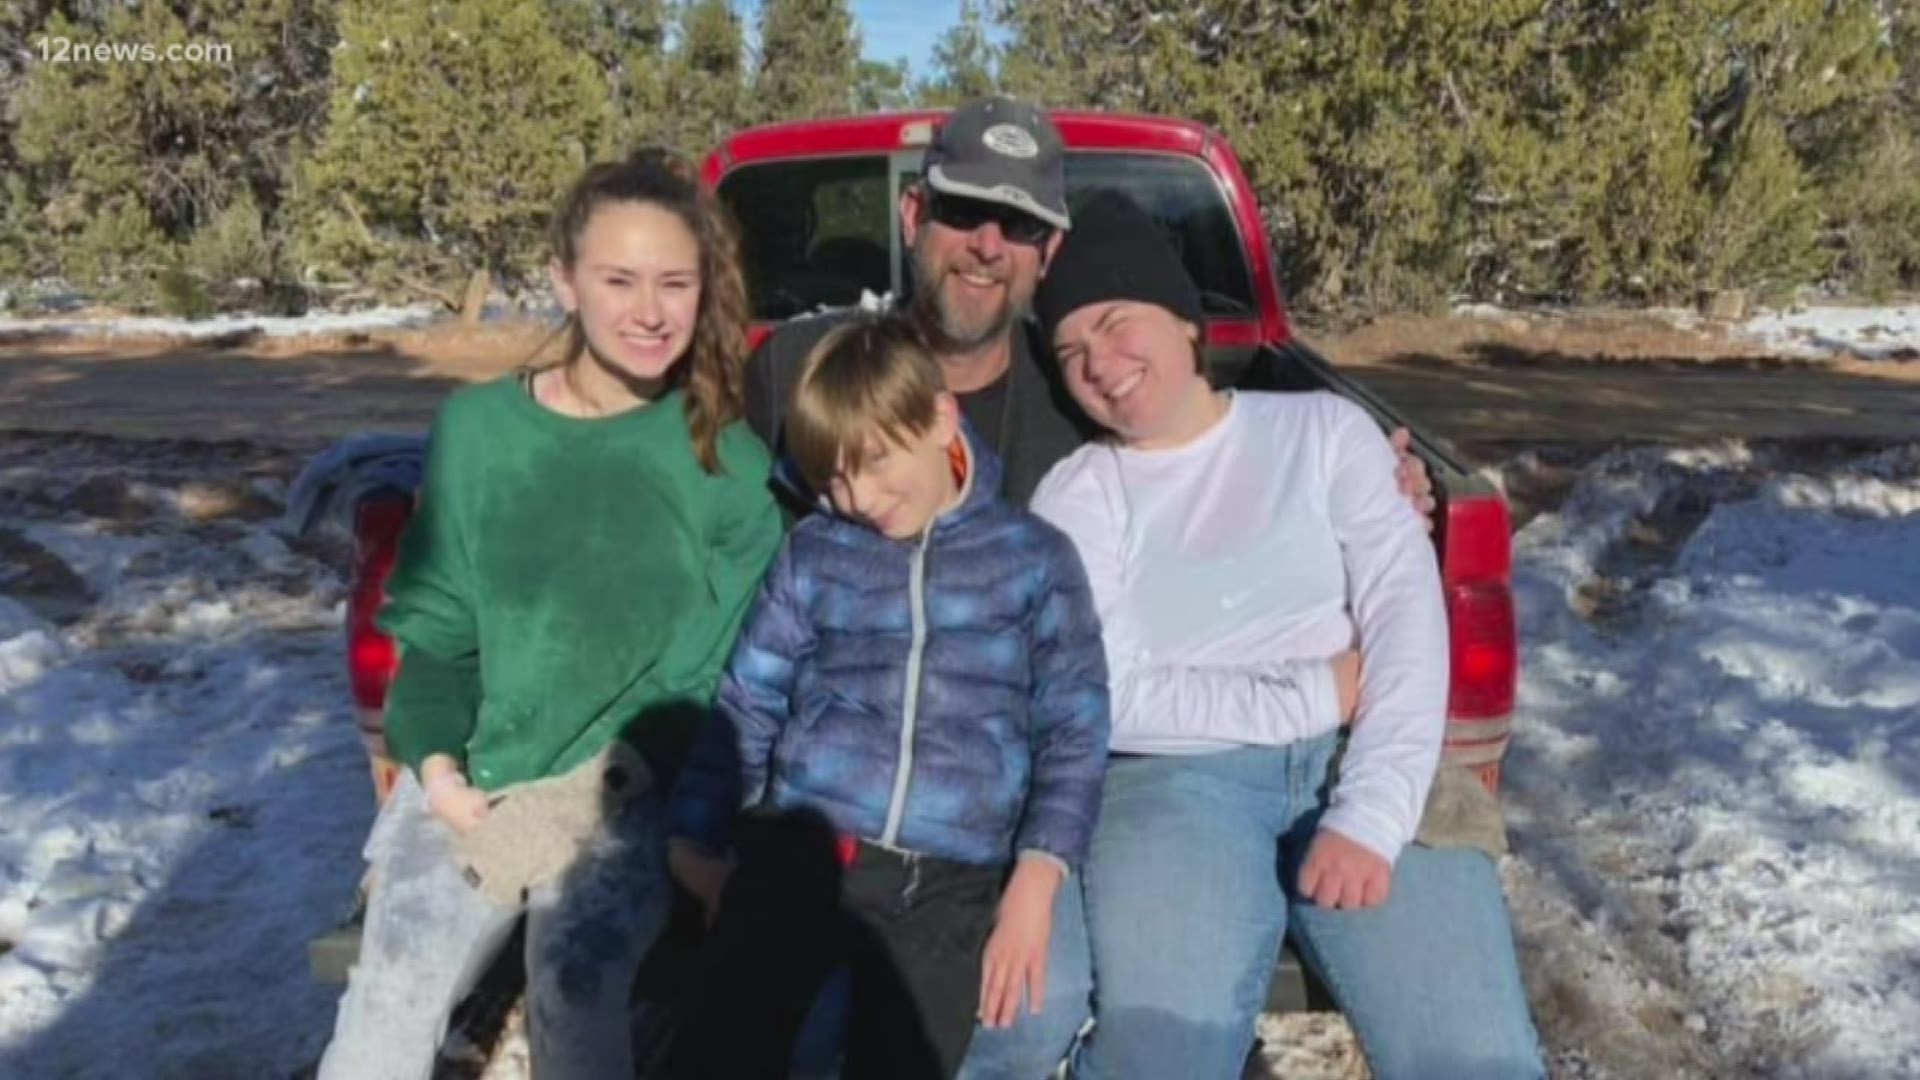 Stacie and Tom Kvanvig were traveling with their son when the plane they were on went down in northeast Nevada. A GoFundMe has been set up to help their daughters.